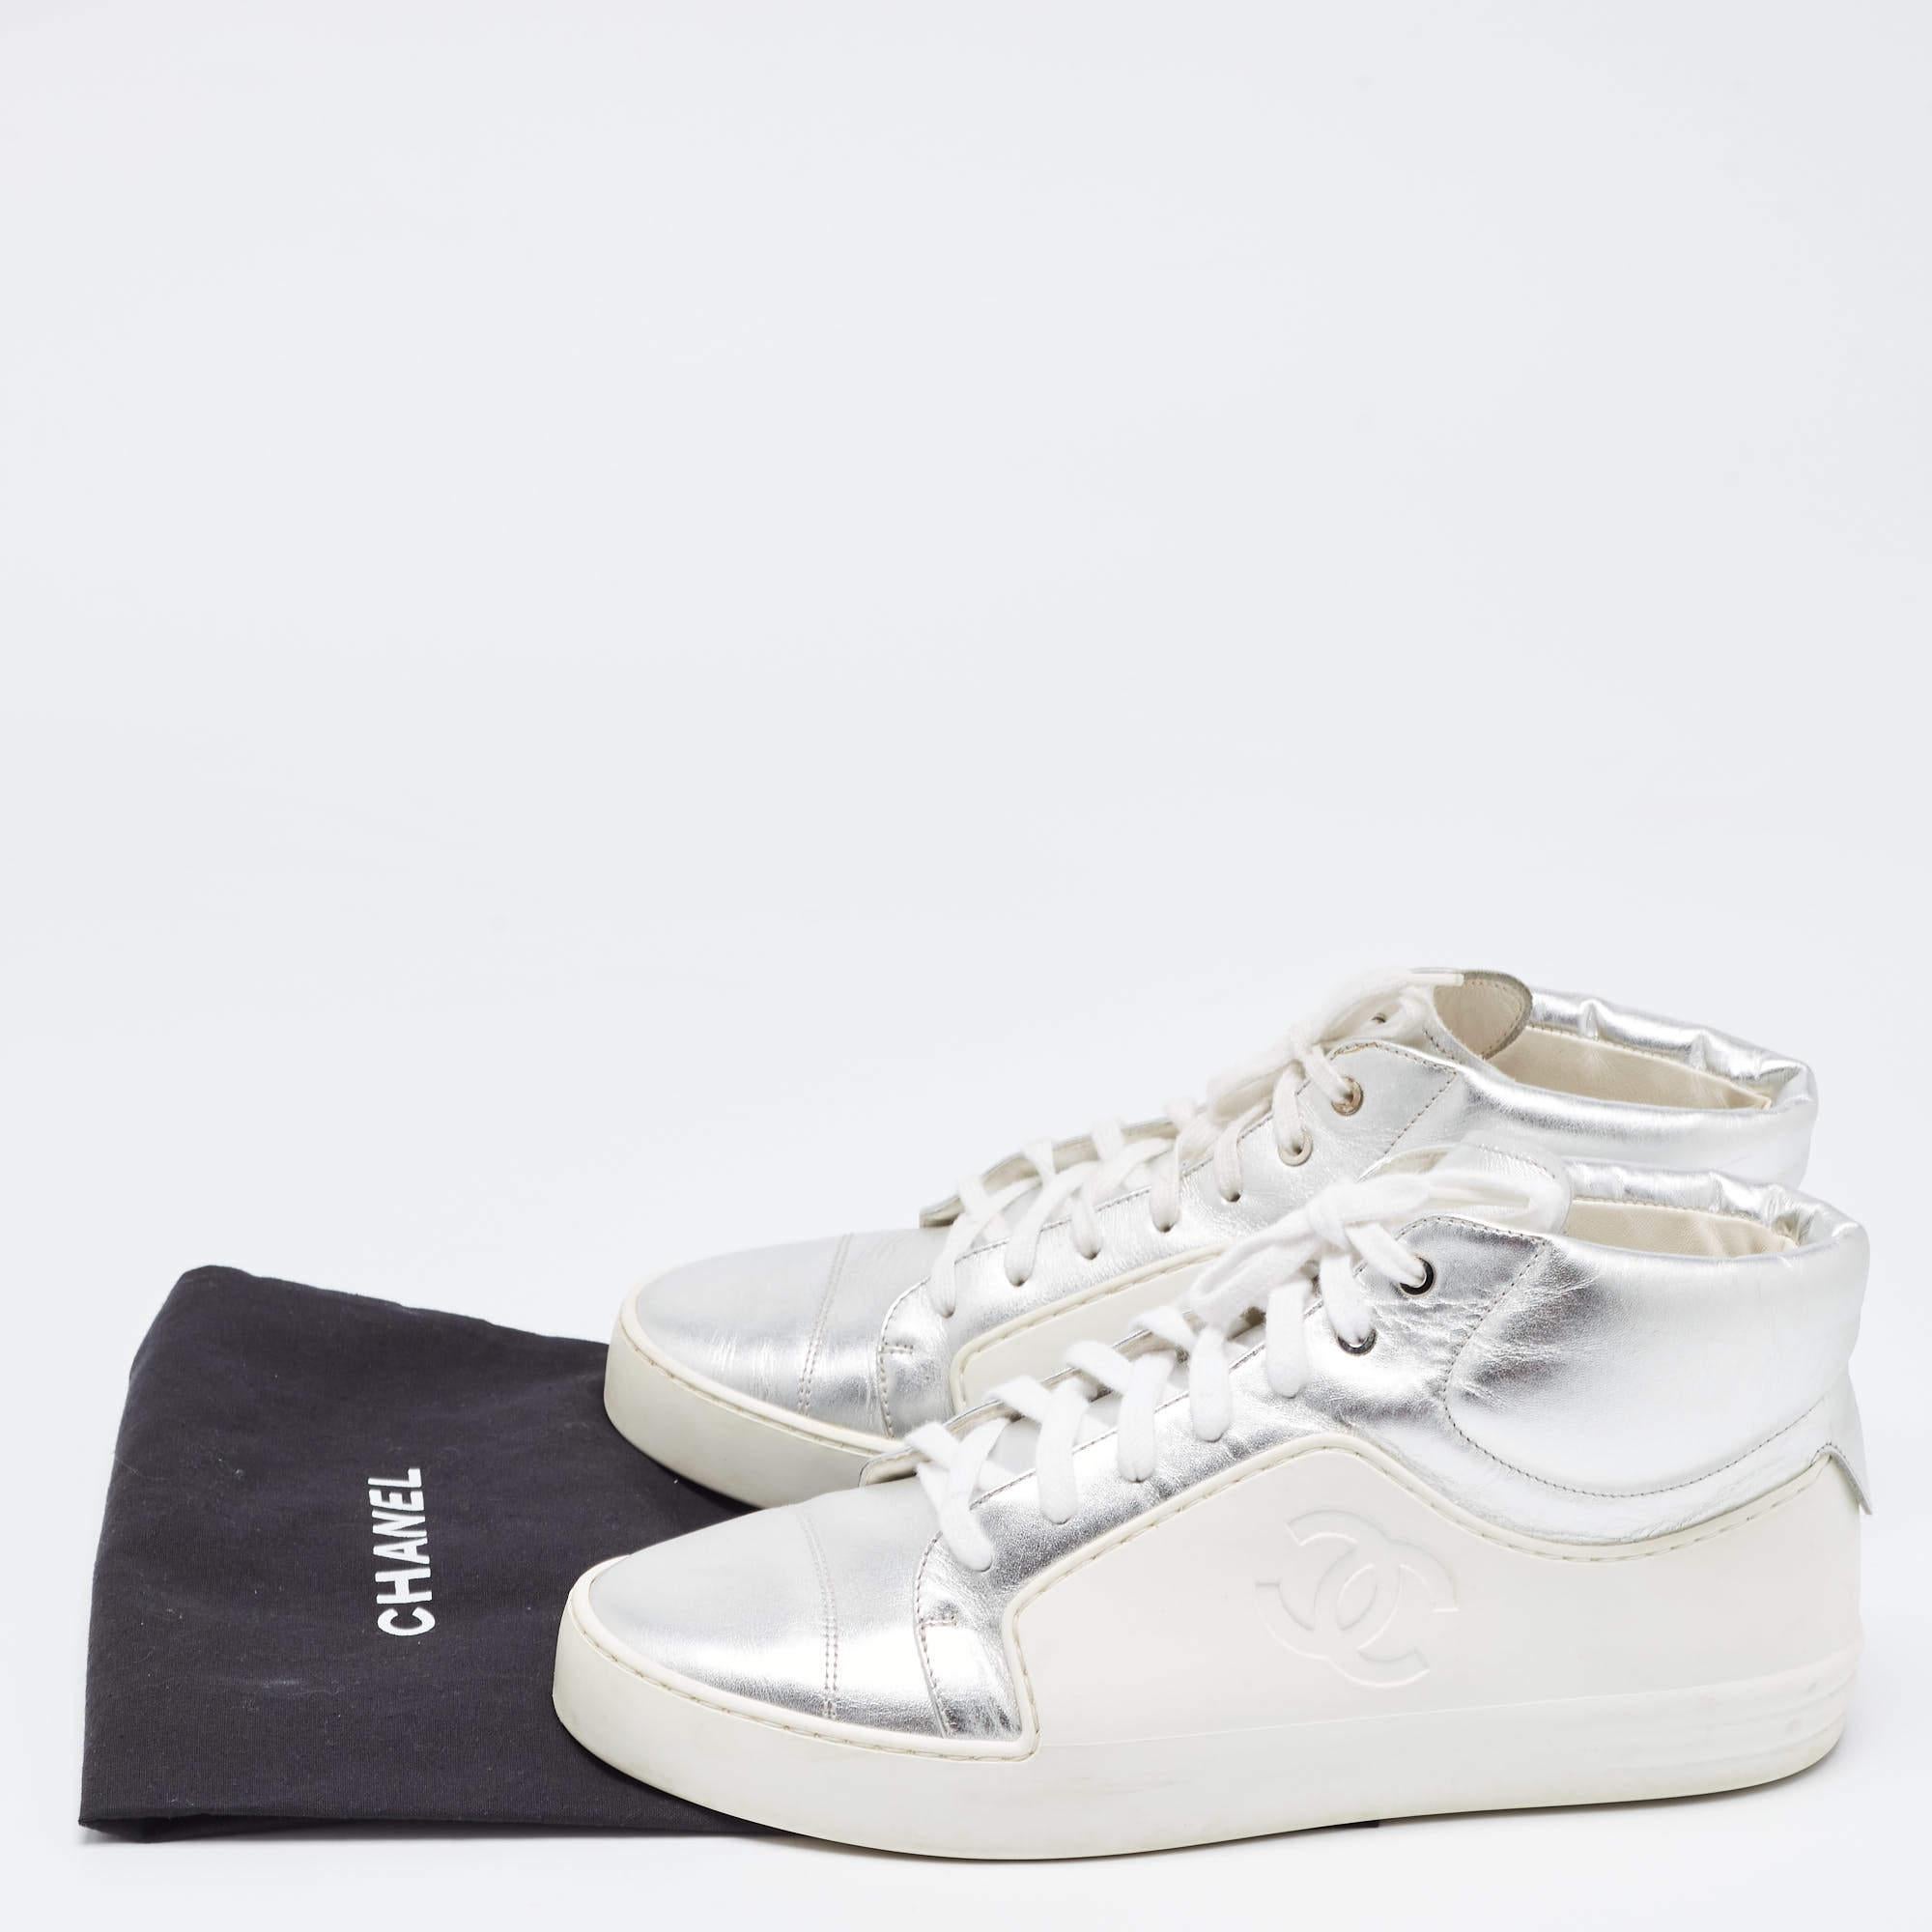 Chanel Metallic Silver/White Leather And Rubber Lace Up High Top Sneakers Size 3 For Sale 5